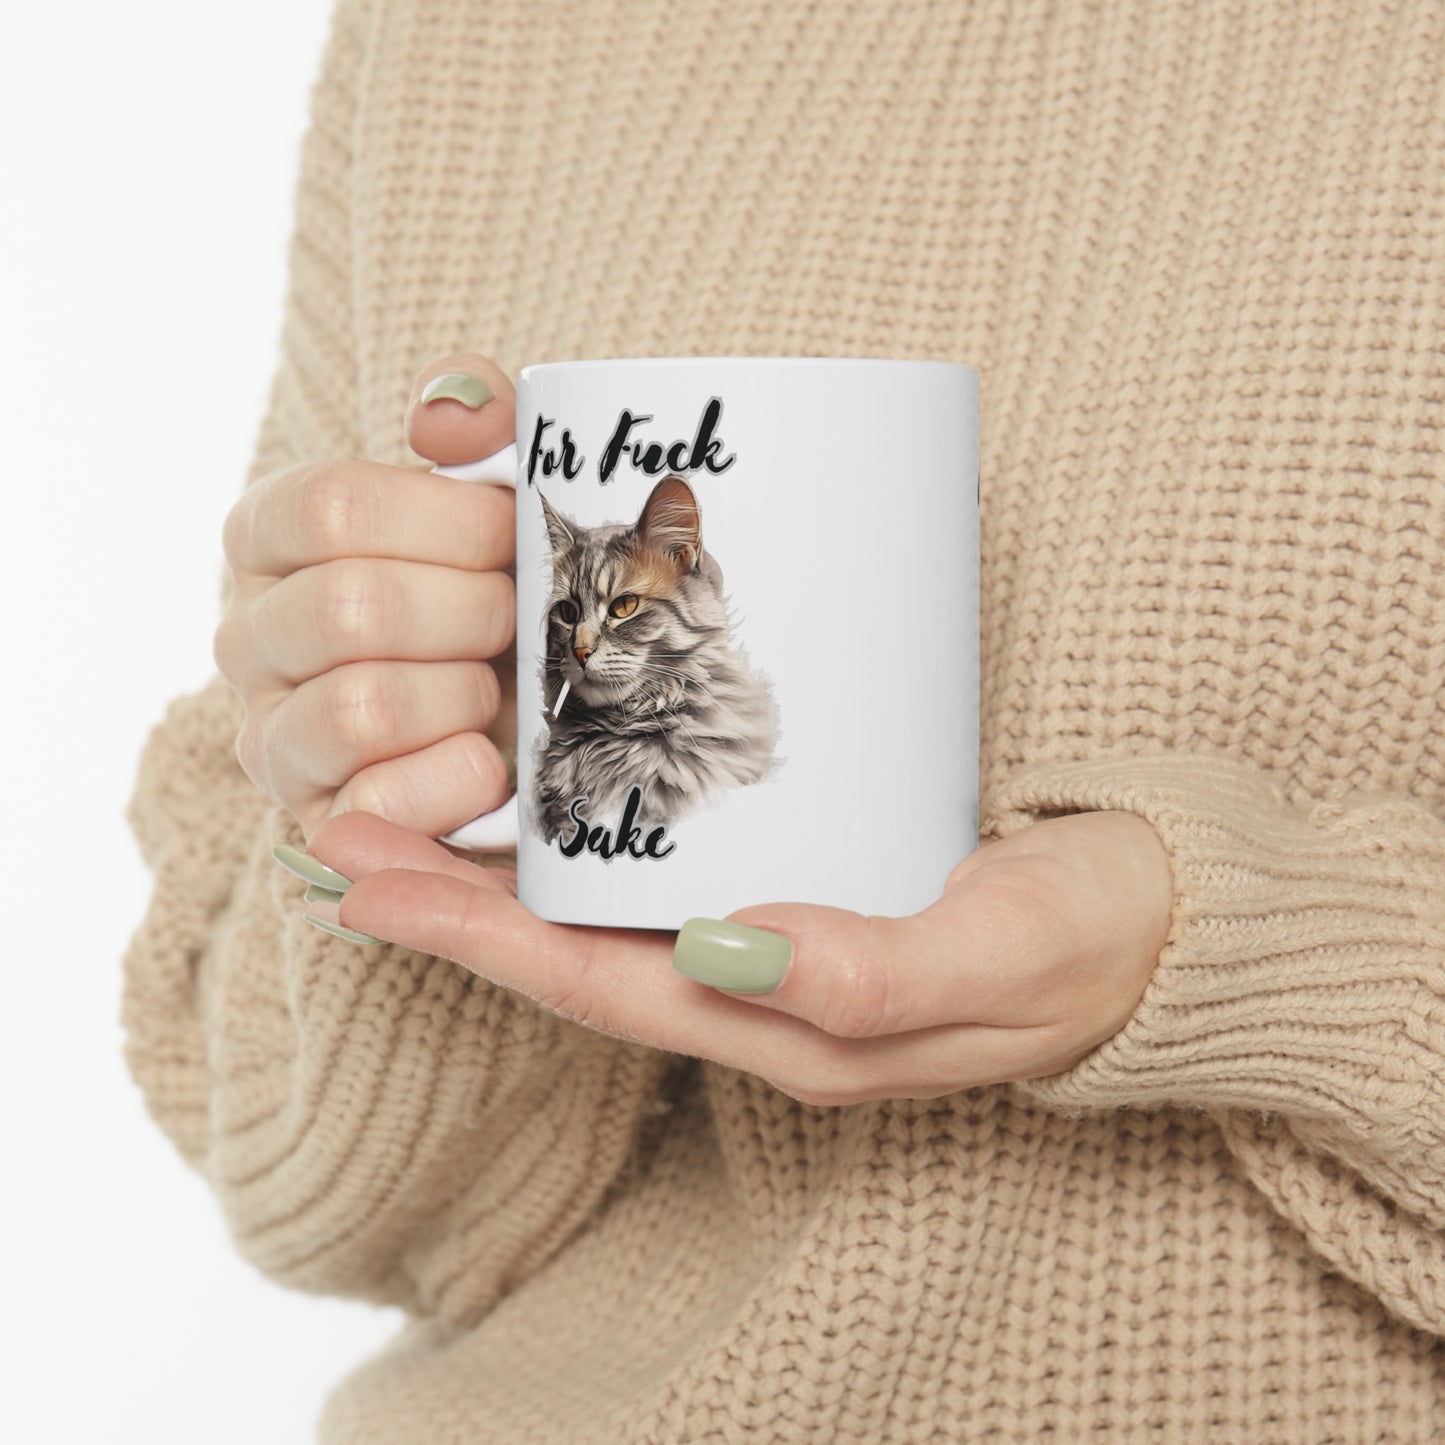 Funny Mug - Sarcastic, Rude Language, Explicit, Edgy Gift - Controversial Quote - 'For F*** Sake, For Cat Sake, Oh For F*** Sake' Mug   